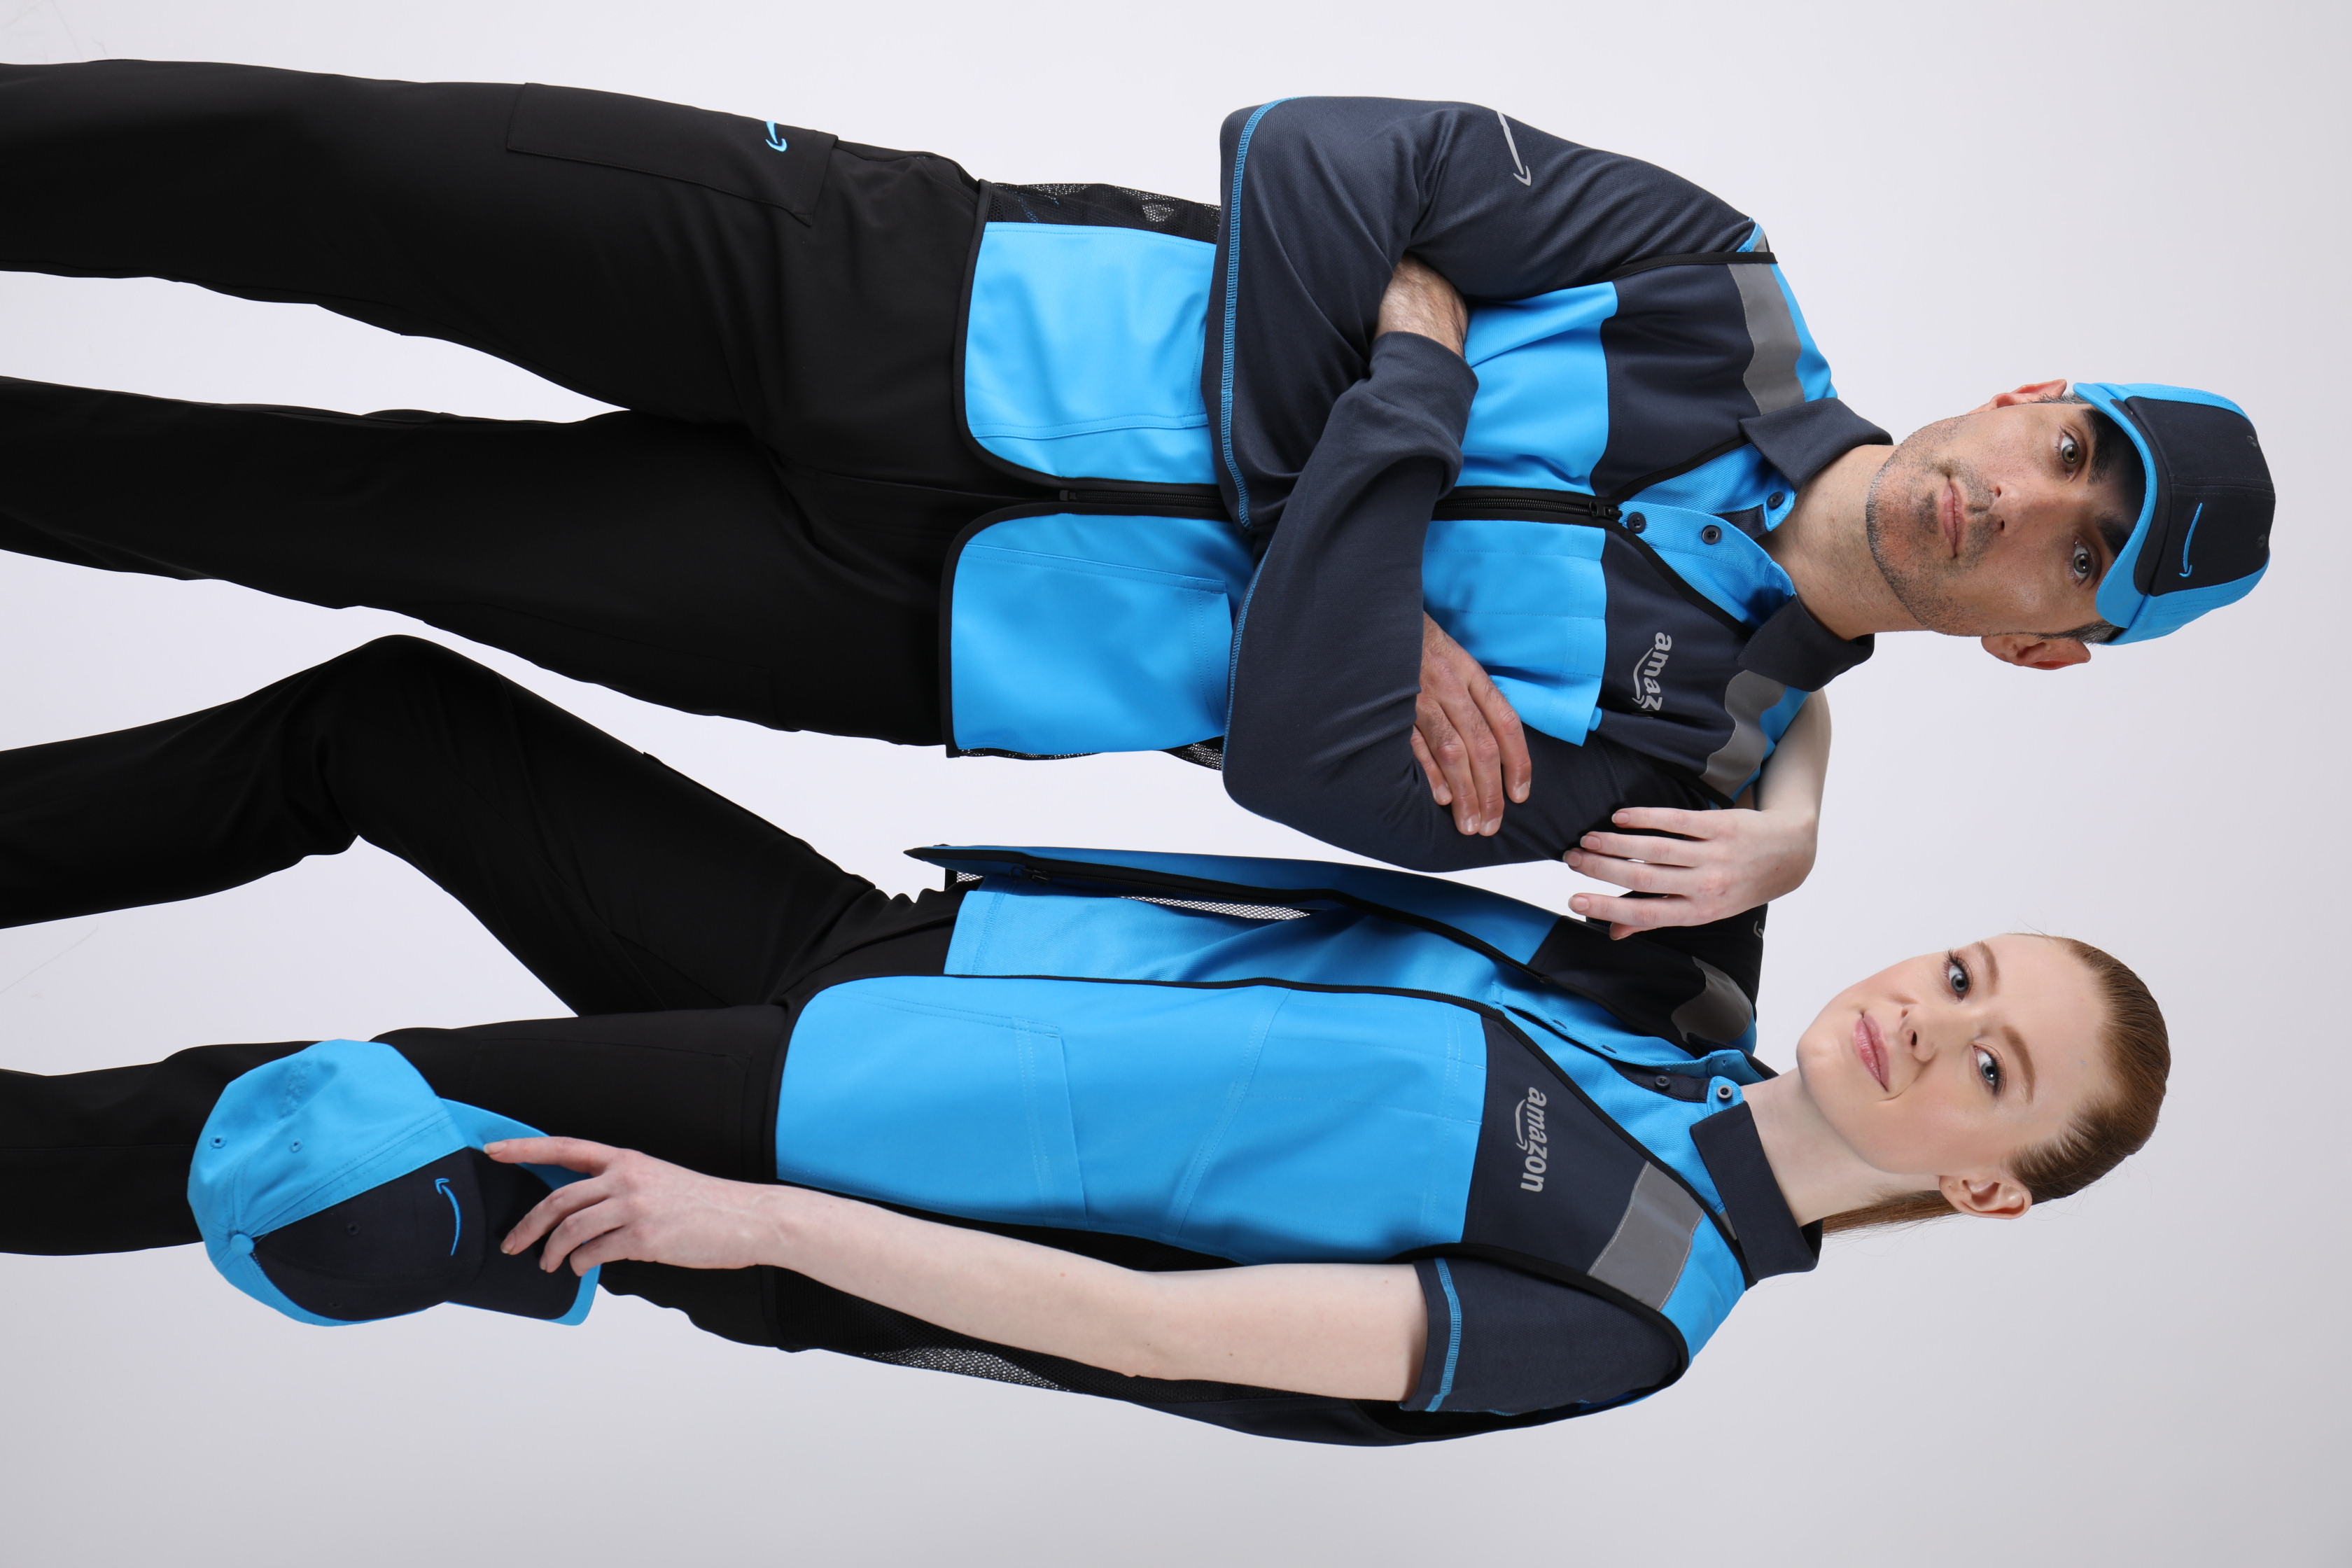 MUSE Design Winners - Luly Yang for Amazon Uniforms